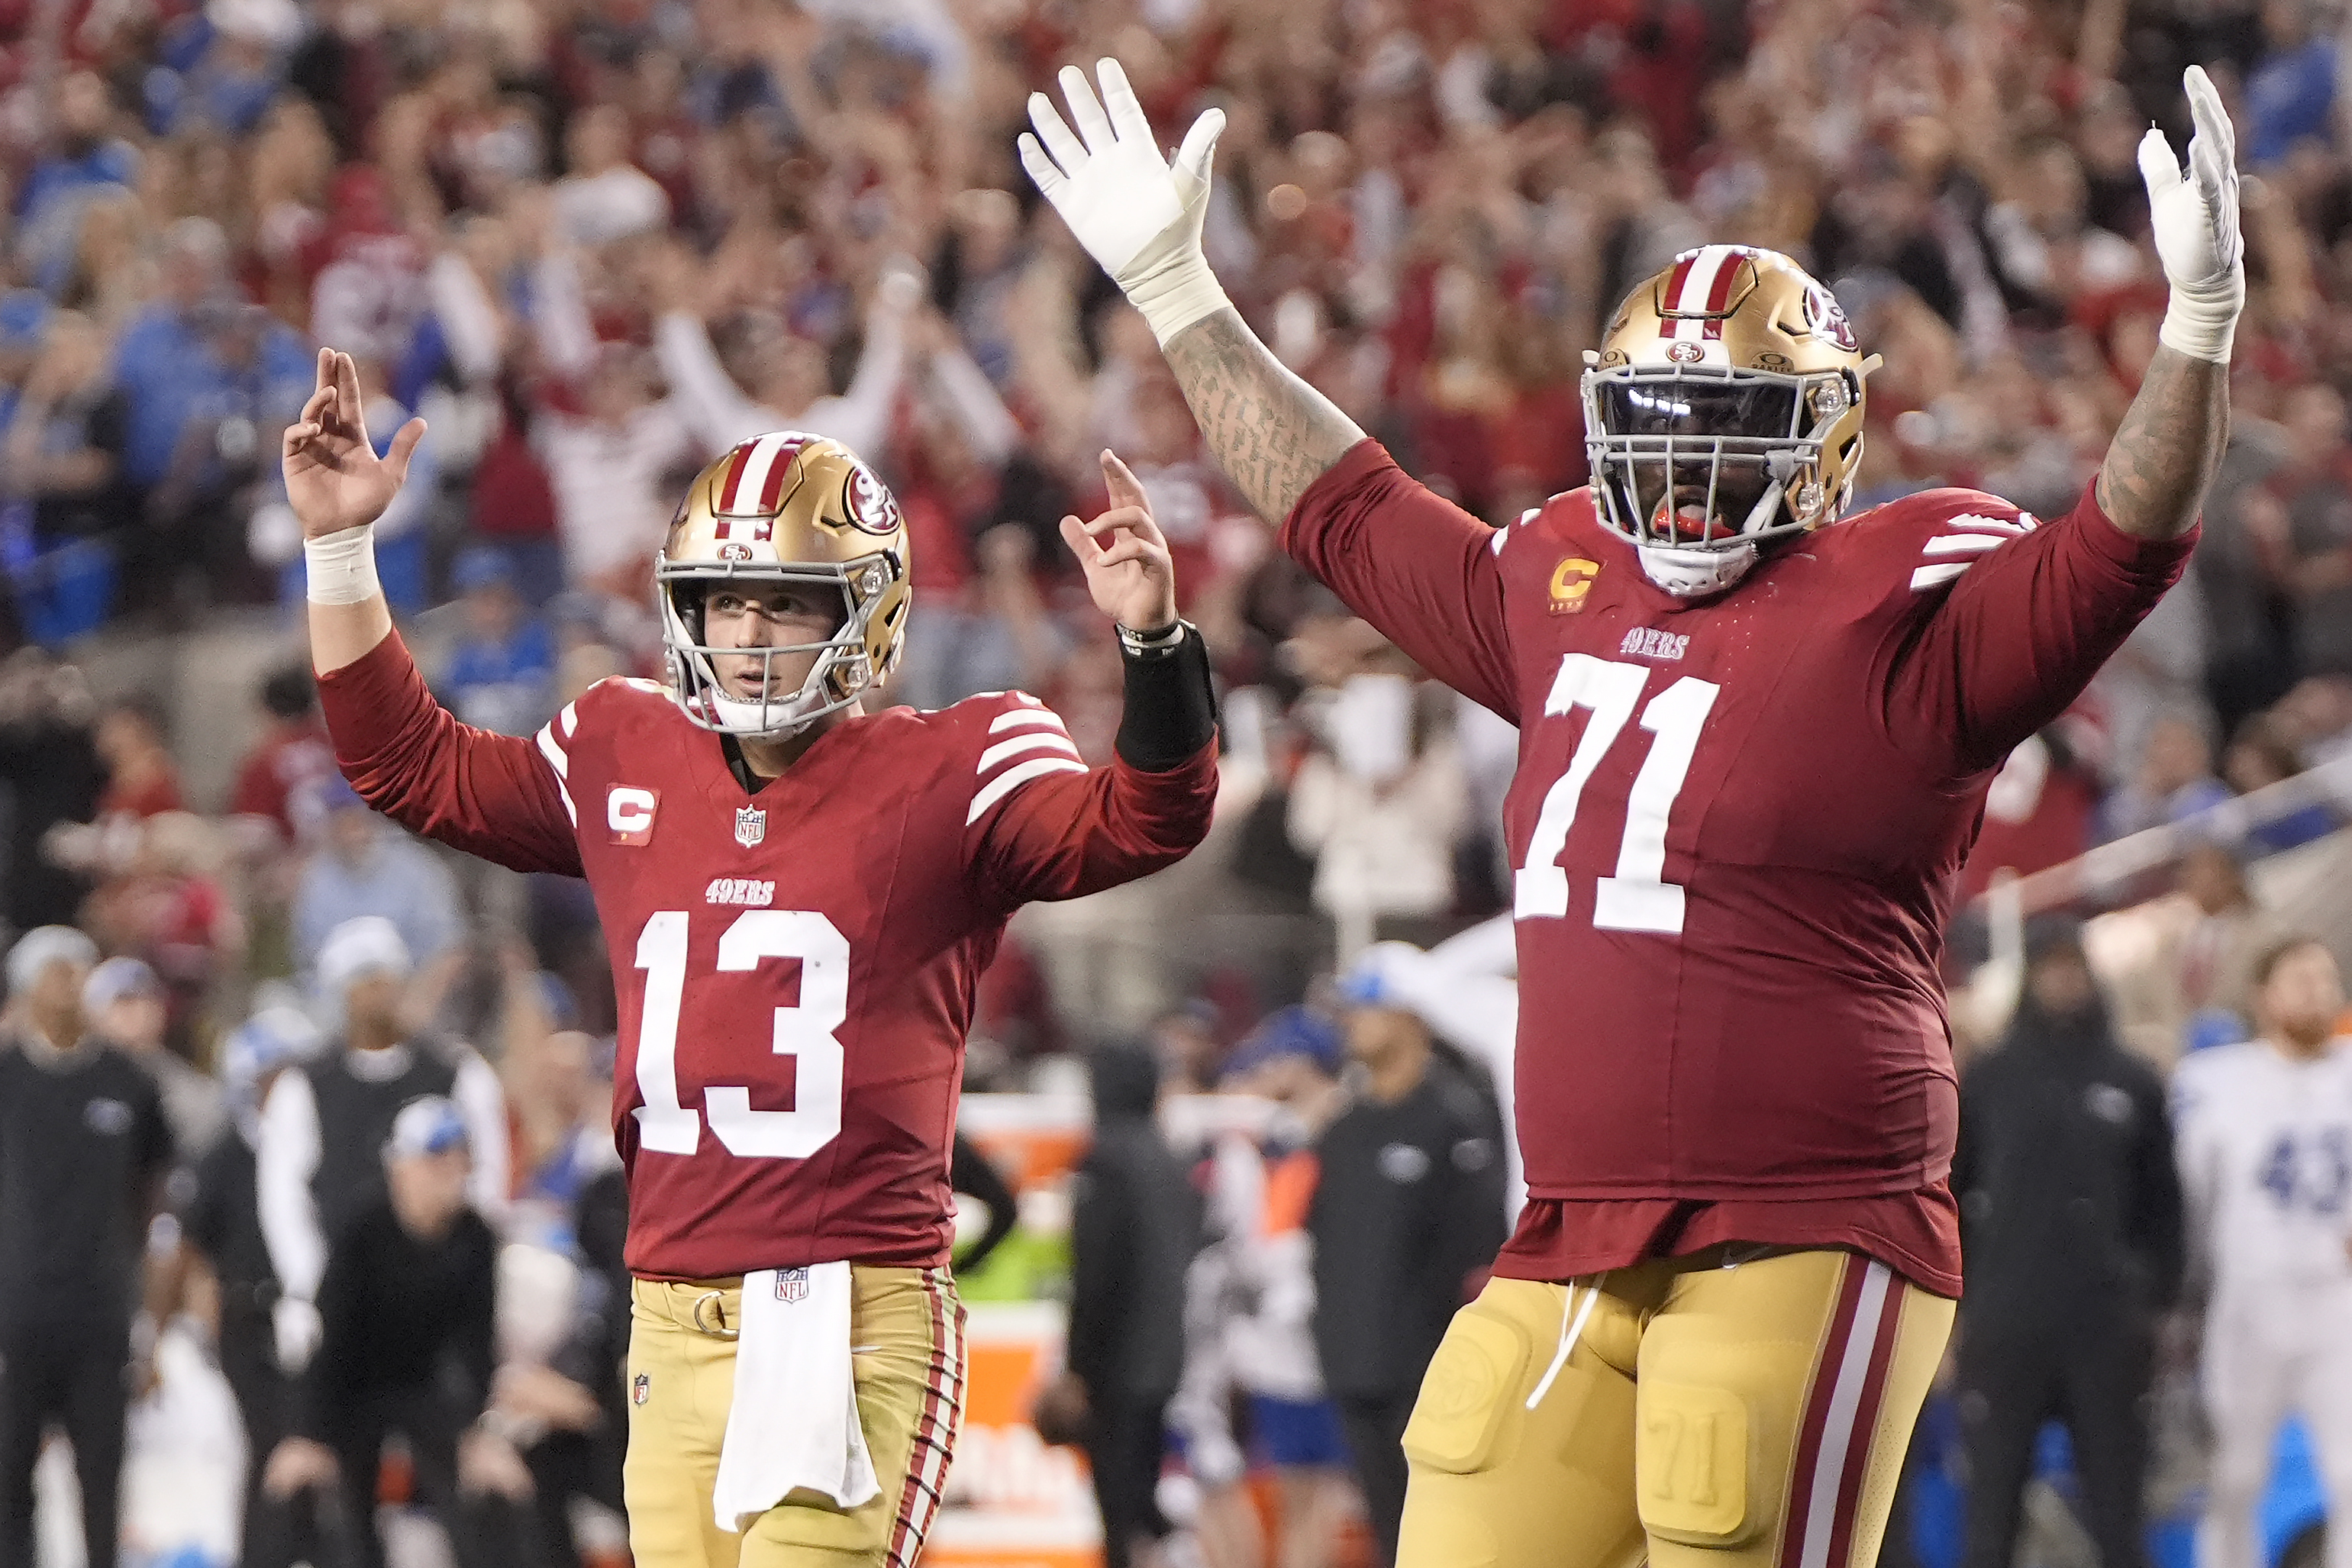 Two football players in red uniforms with '49ers' logo celebrate, raising their arms with a crowd behind them.